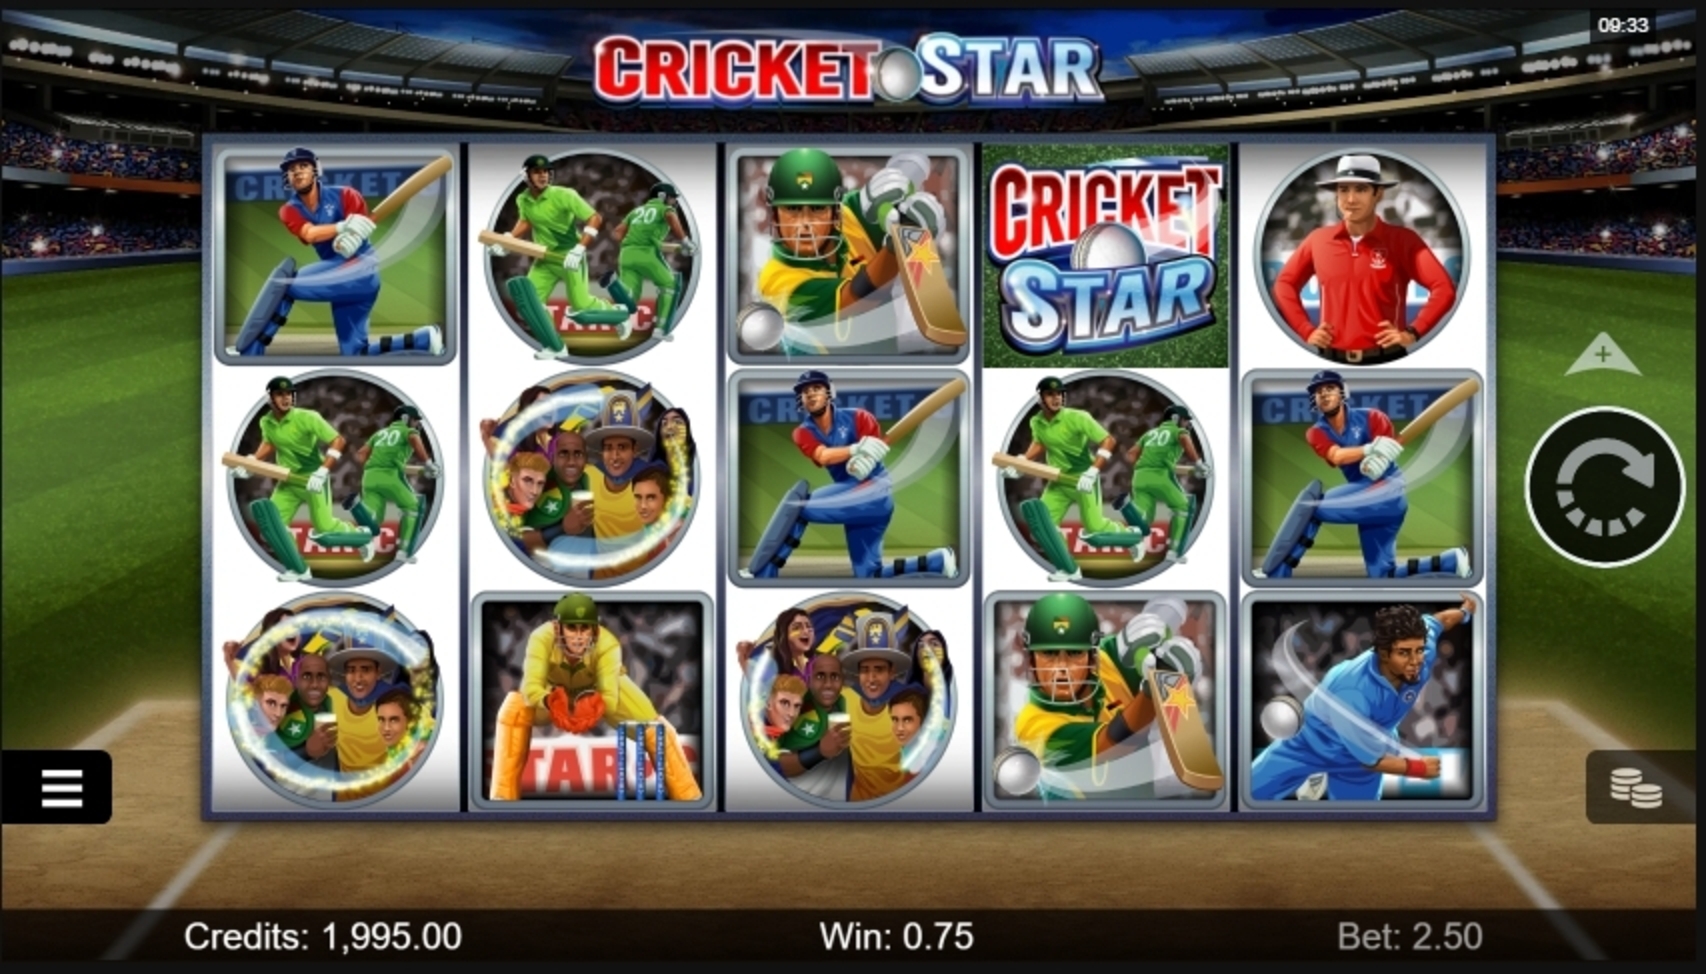 Win Money in Cricket Star Free Slot Game by Microgaming